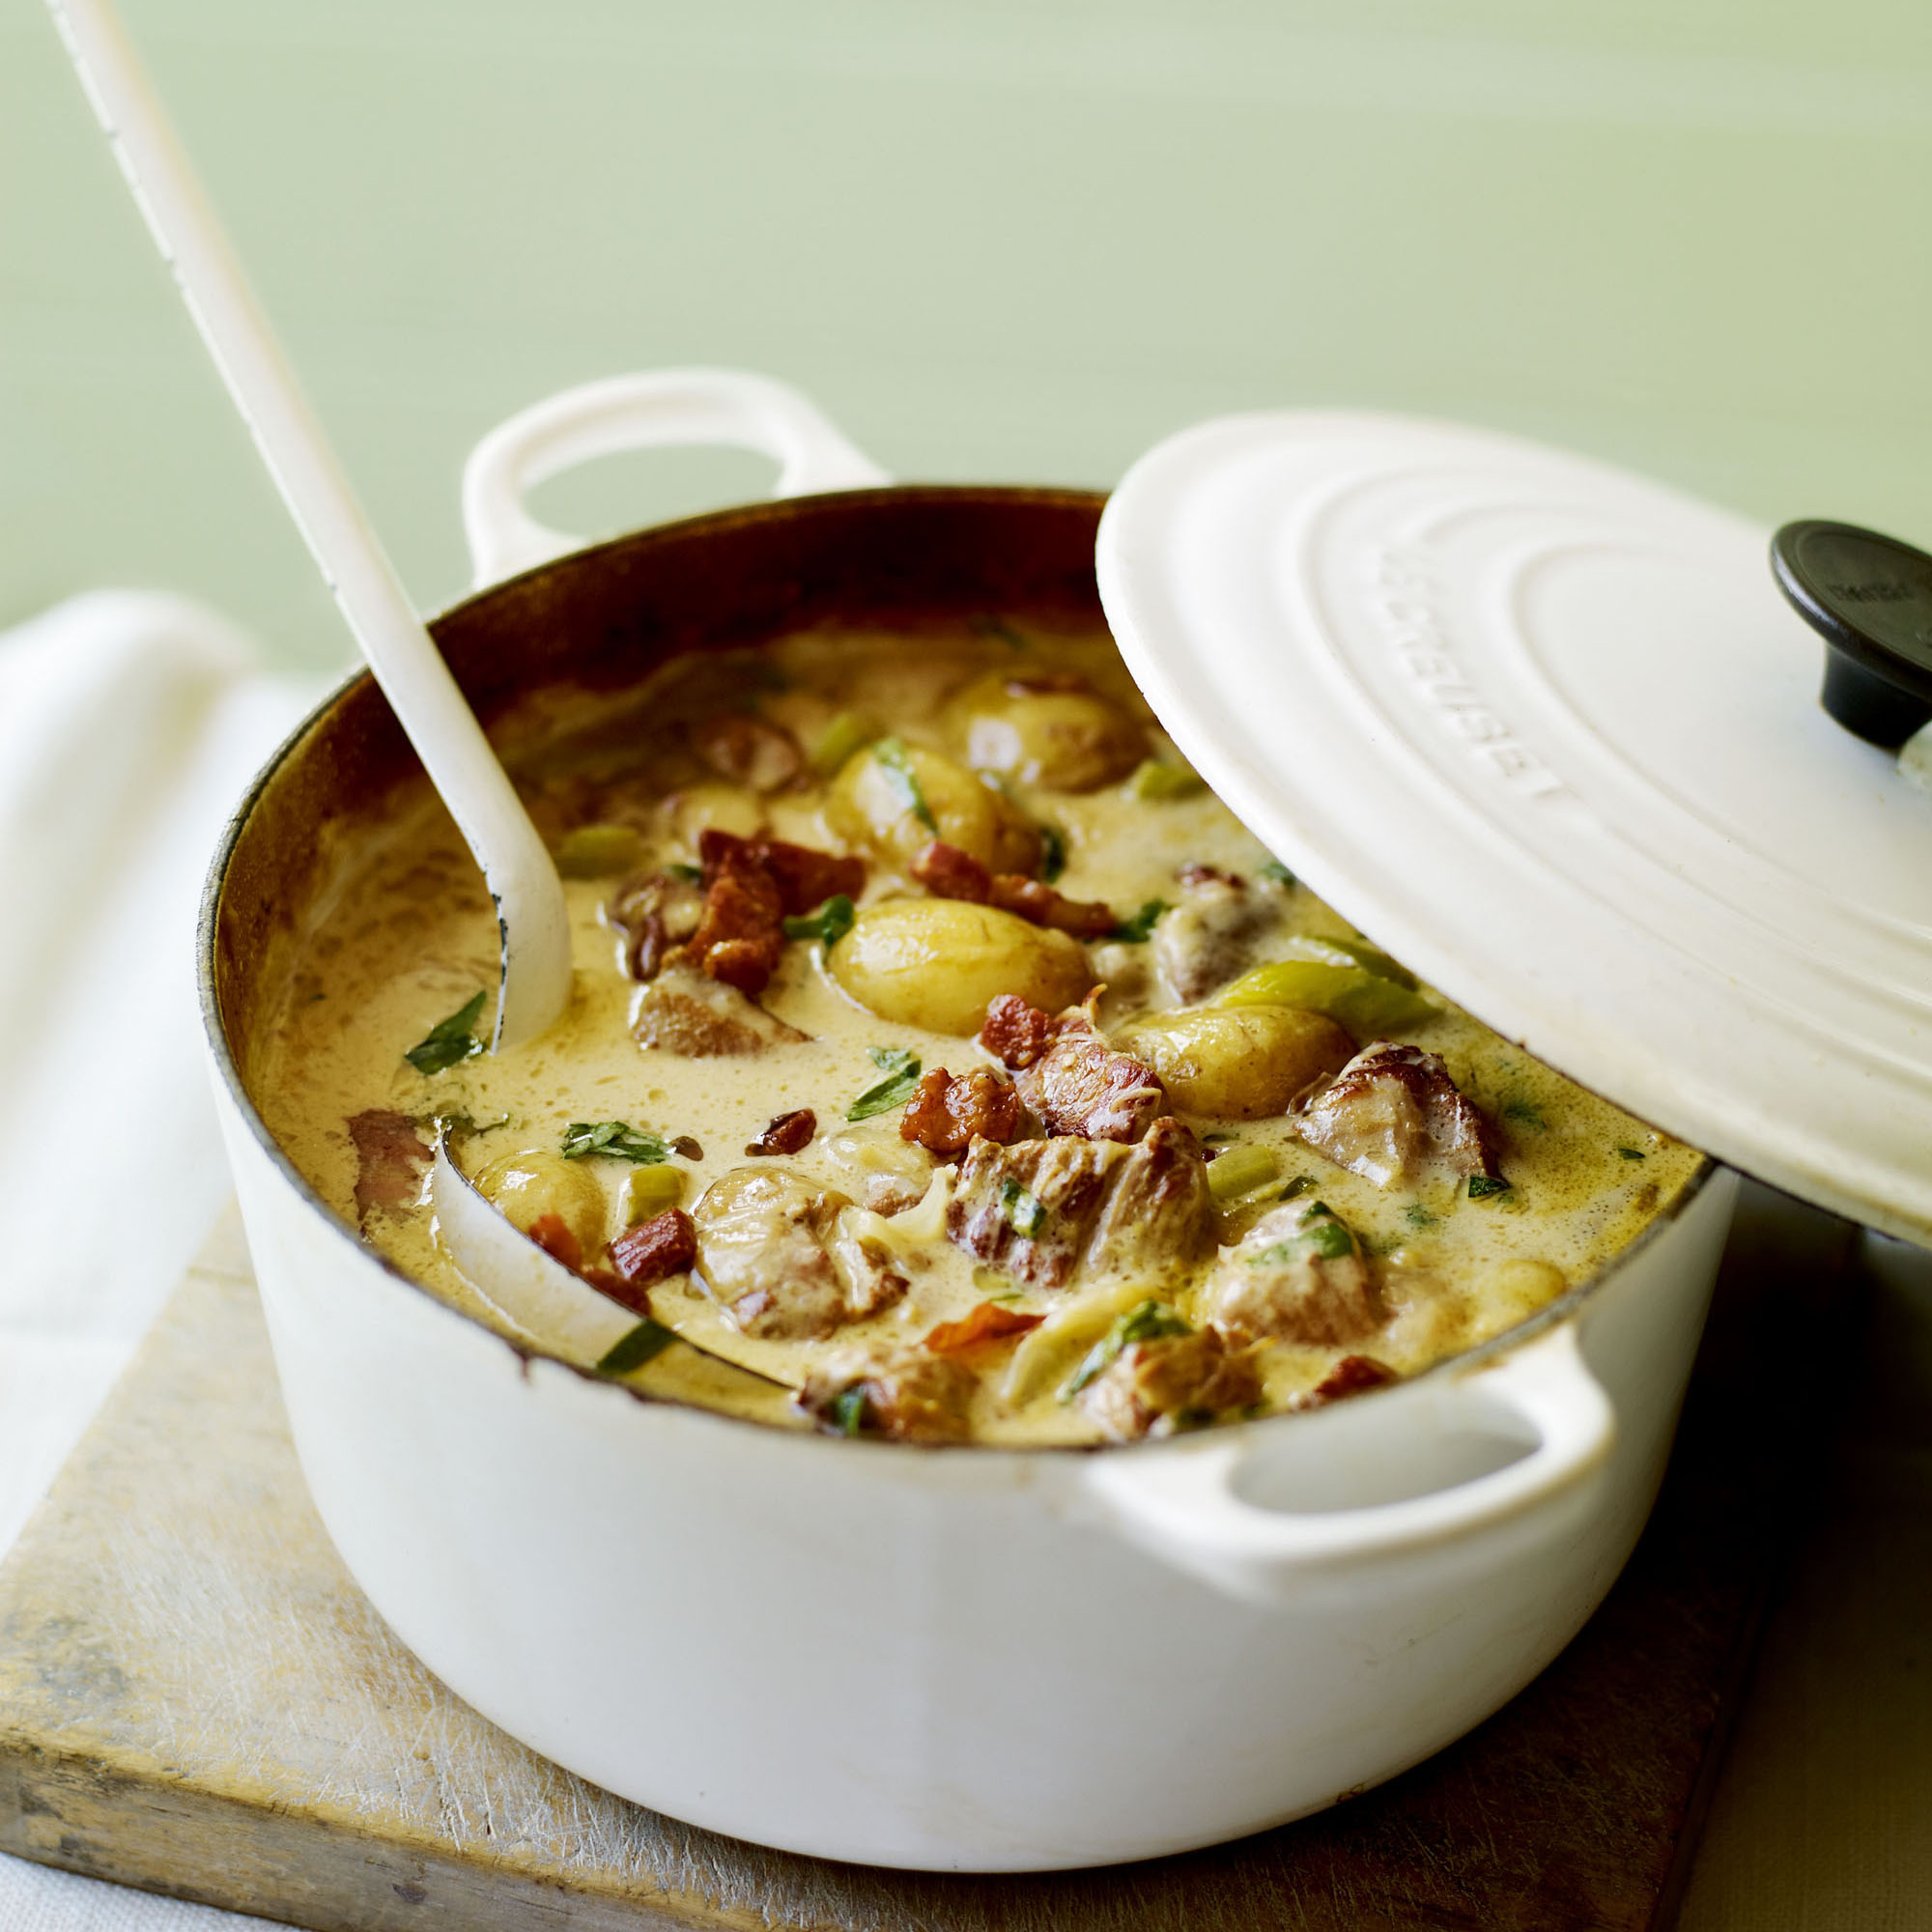 Normandy Pork Casserole With Cider And Bacon Lardons Dinner Recipes Woman Home